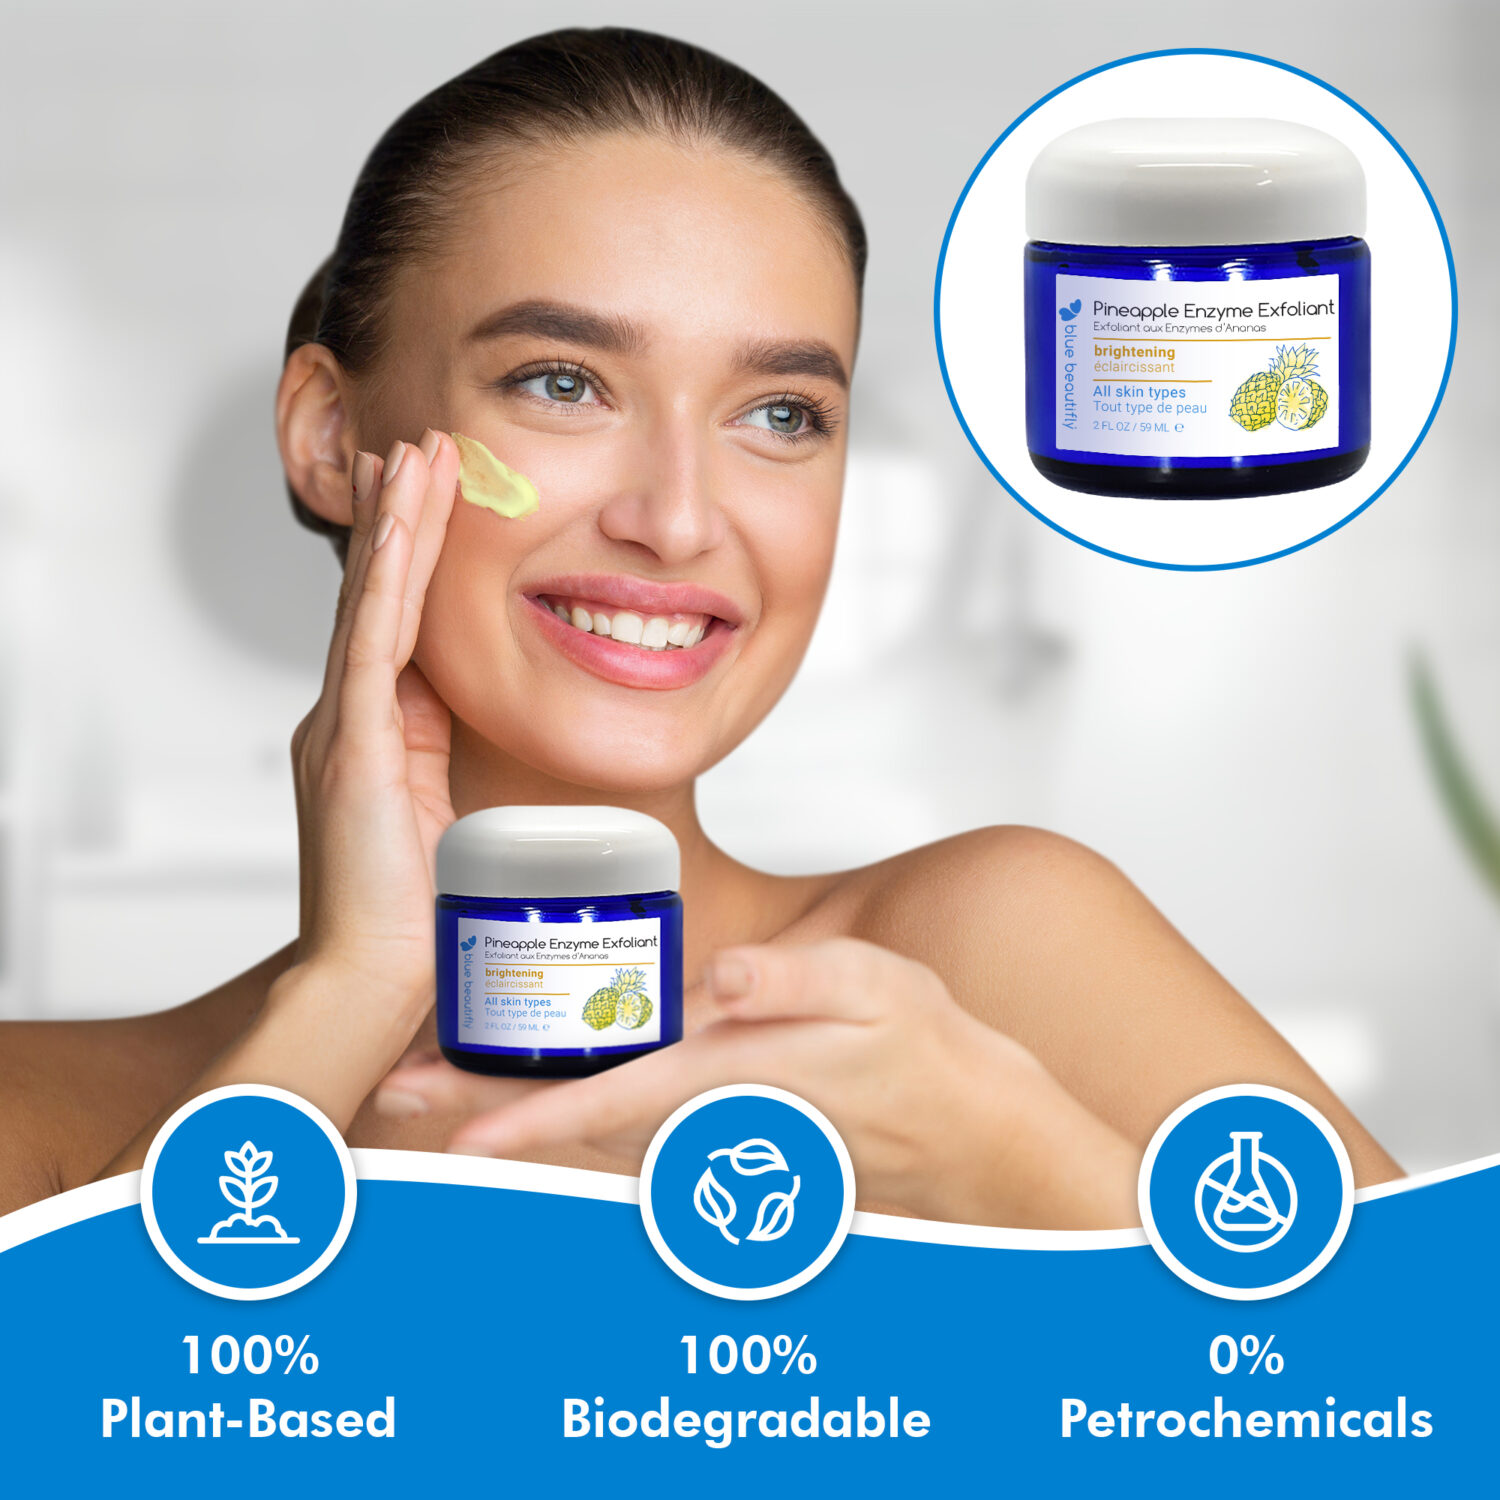 Blue Beautifly Pineapple Exfoliant is 100% plant-based and biodegradable and contains no petrochemicals or toxins